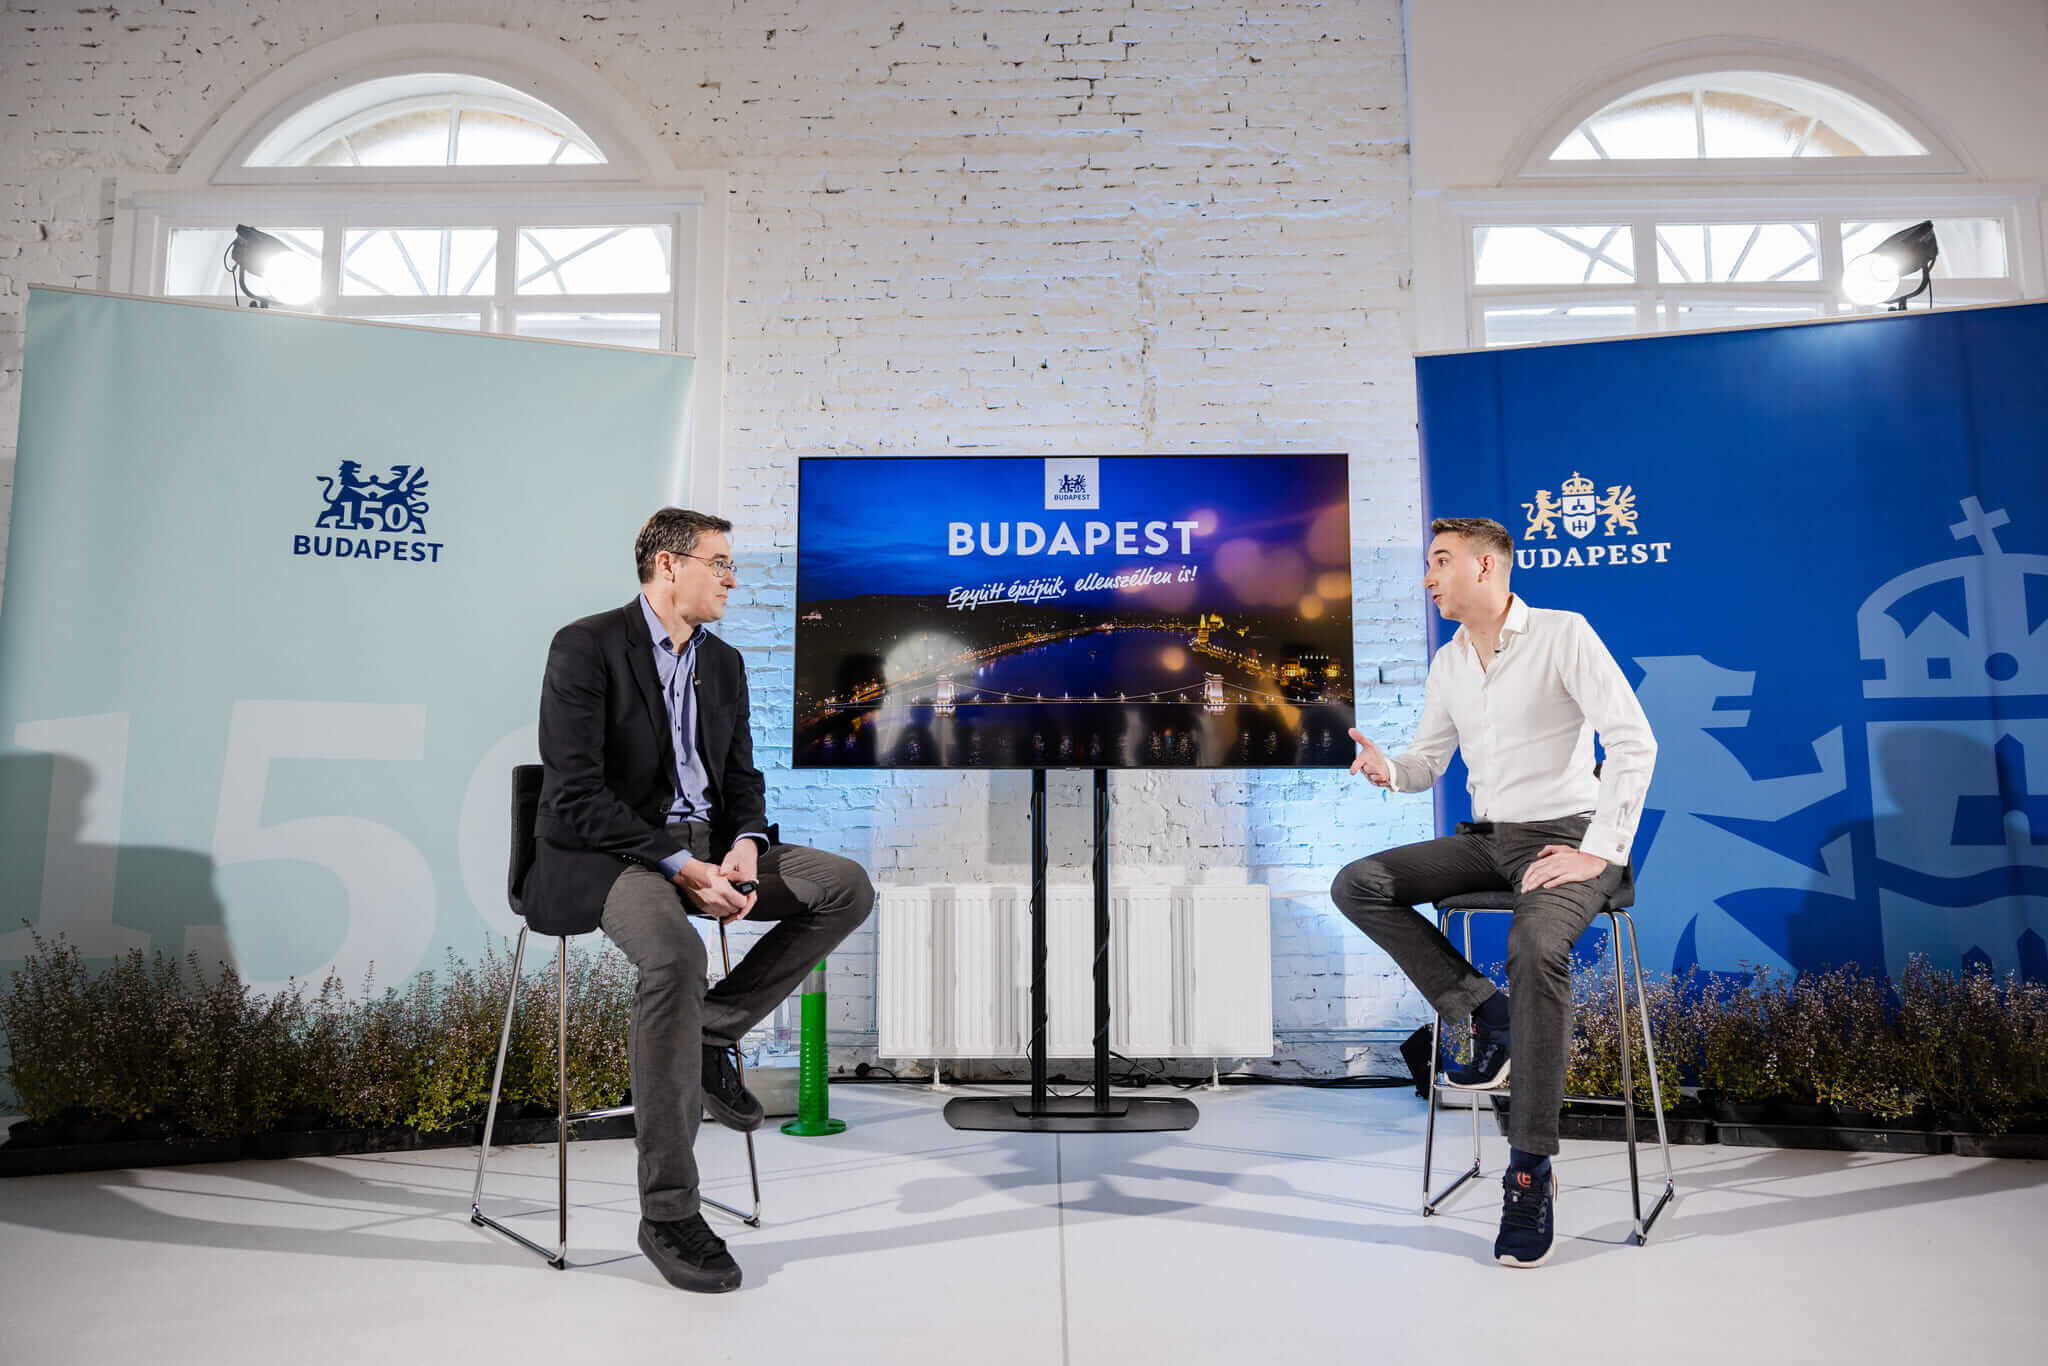 'The People of Budapest Are the Boss', Says Mayor, While Explaining how 